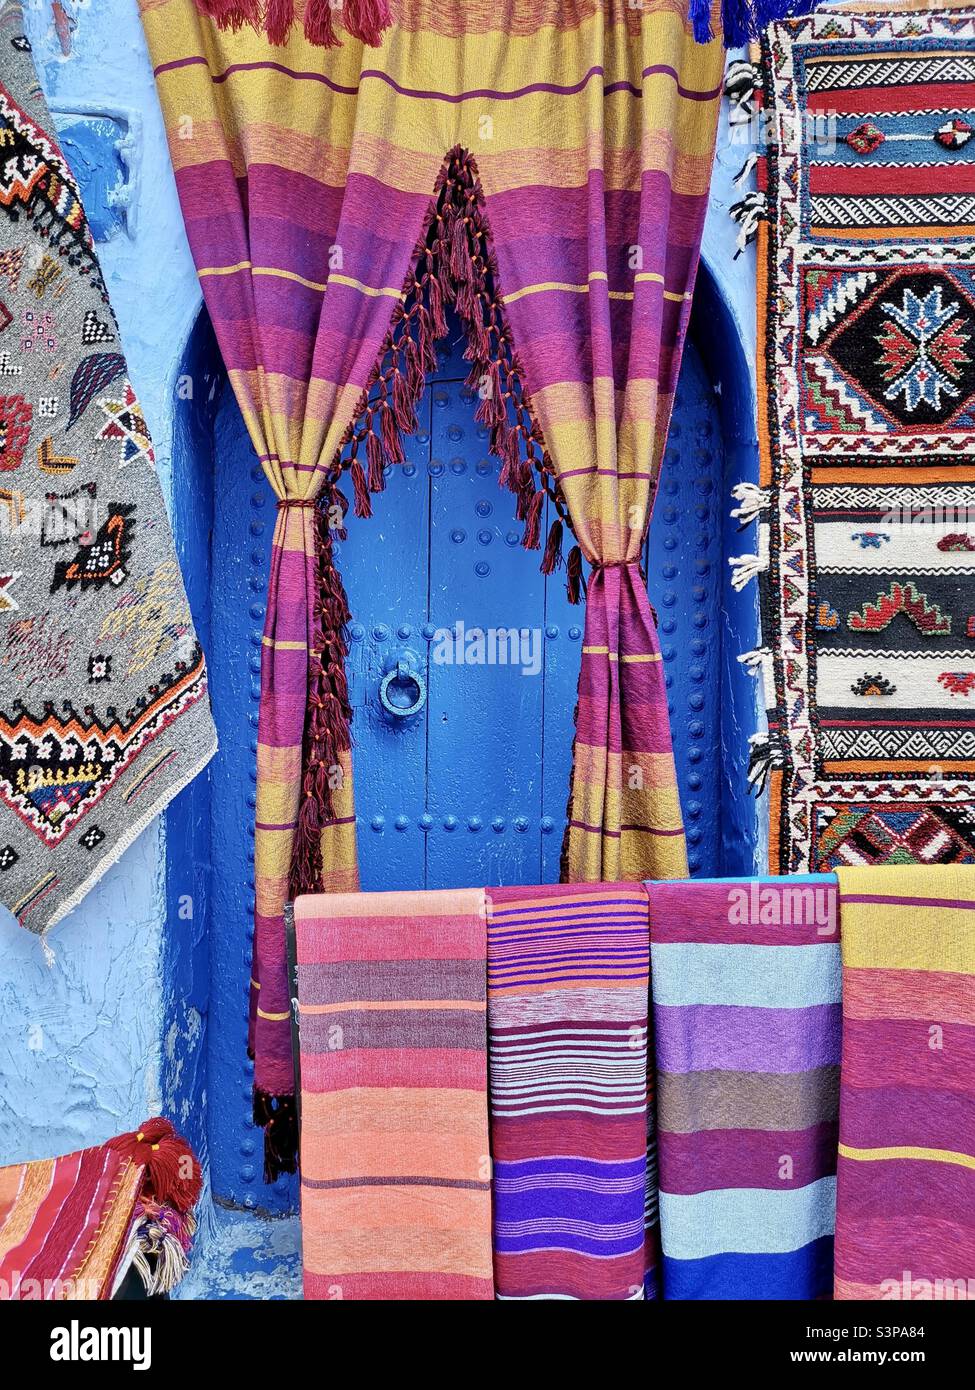 Traditional Moroccan garments ,scarfs and carpets hanged by a blue door in Chefchaouen, Morocco. Stock Photo